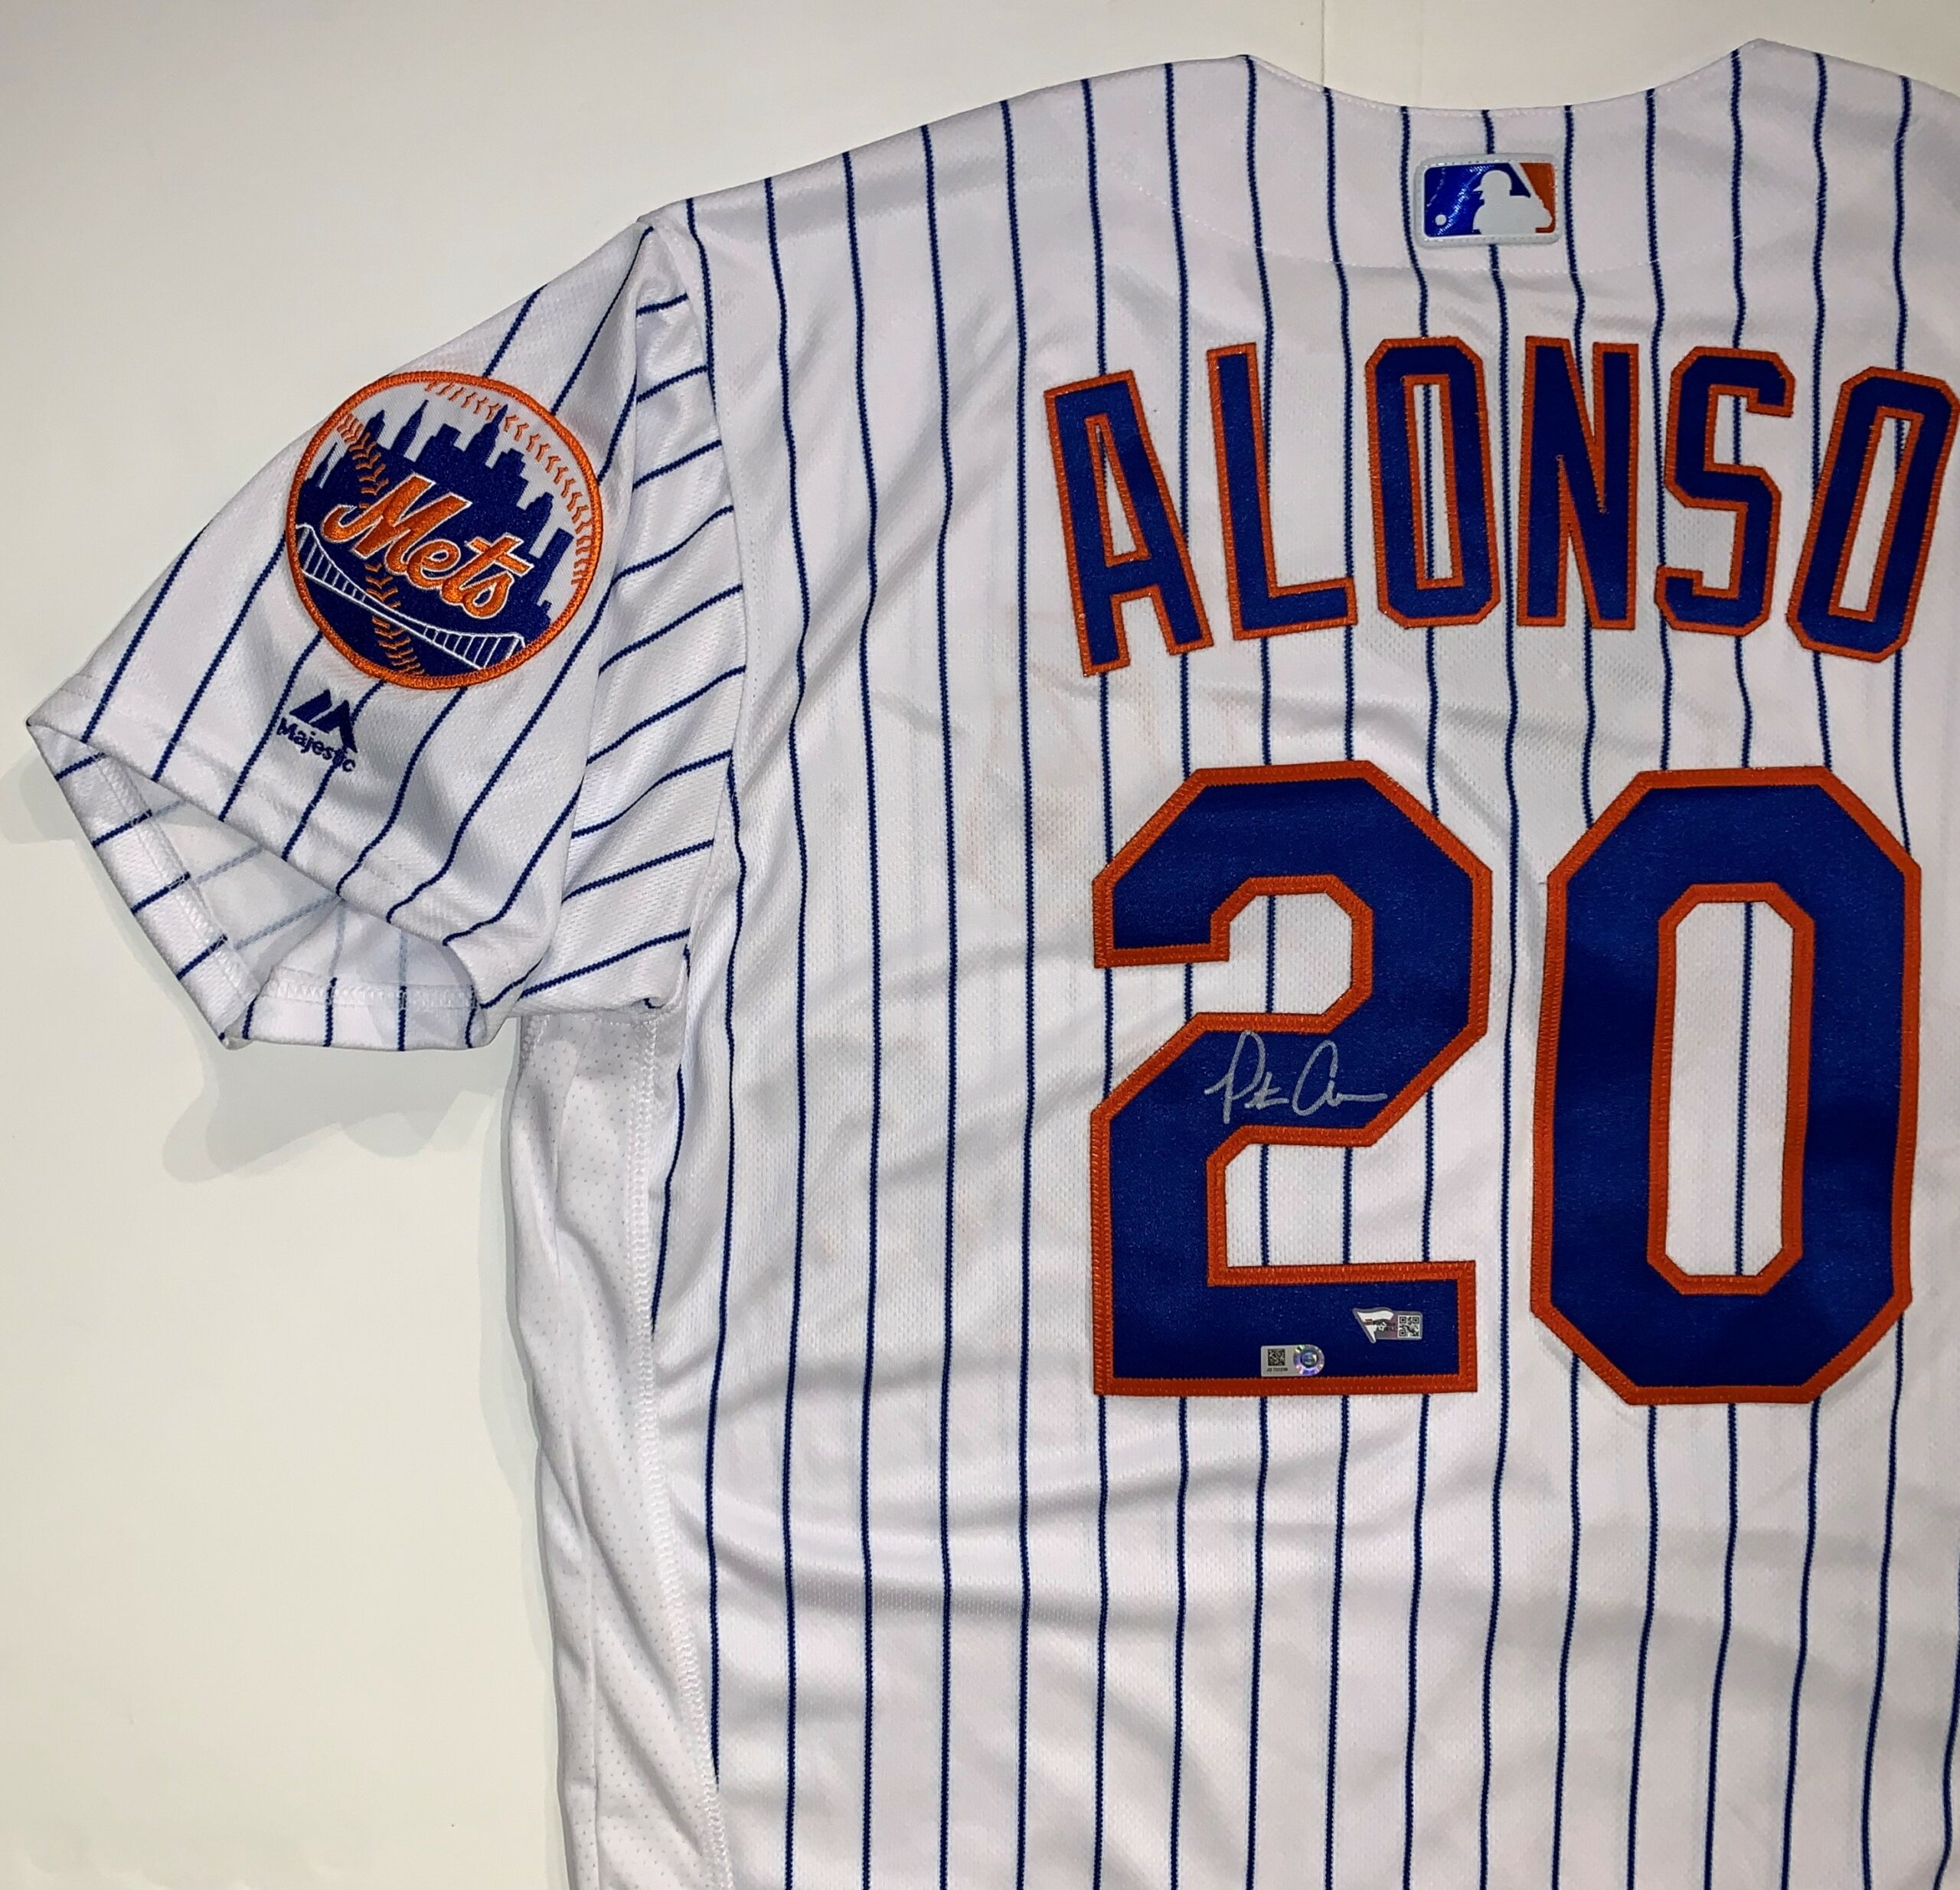 Pete Alonso New York Mets Signed Autographed Gray #20 Custom Jersey –